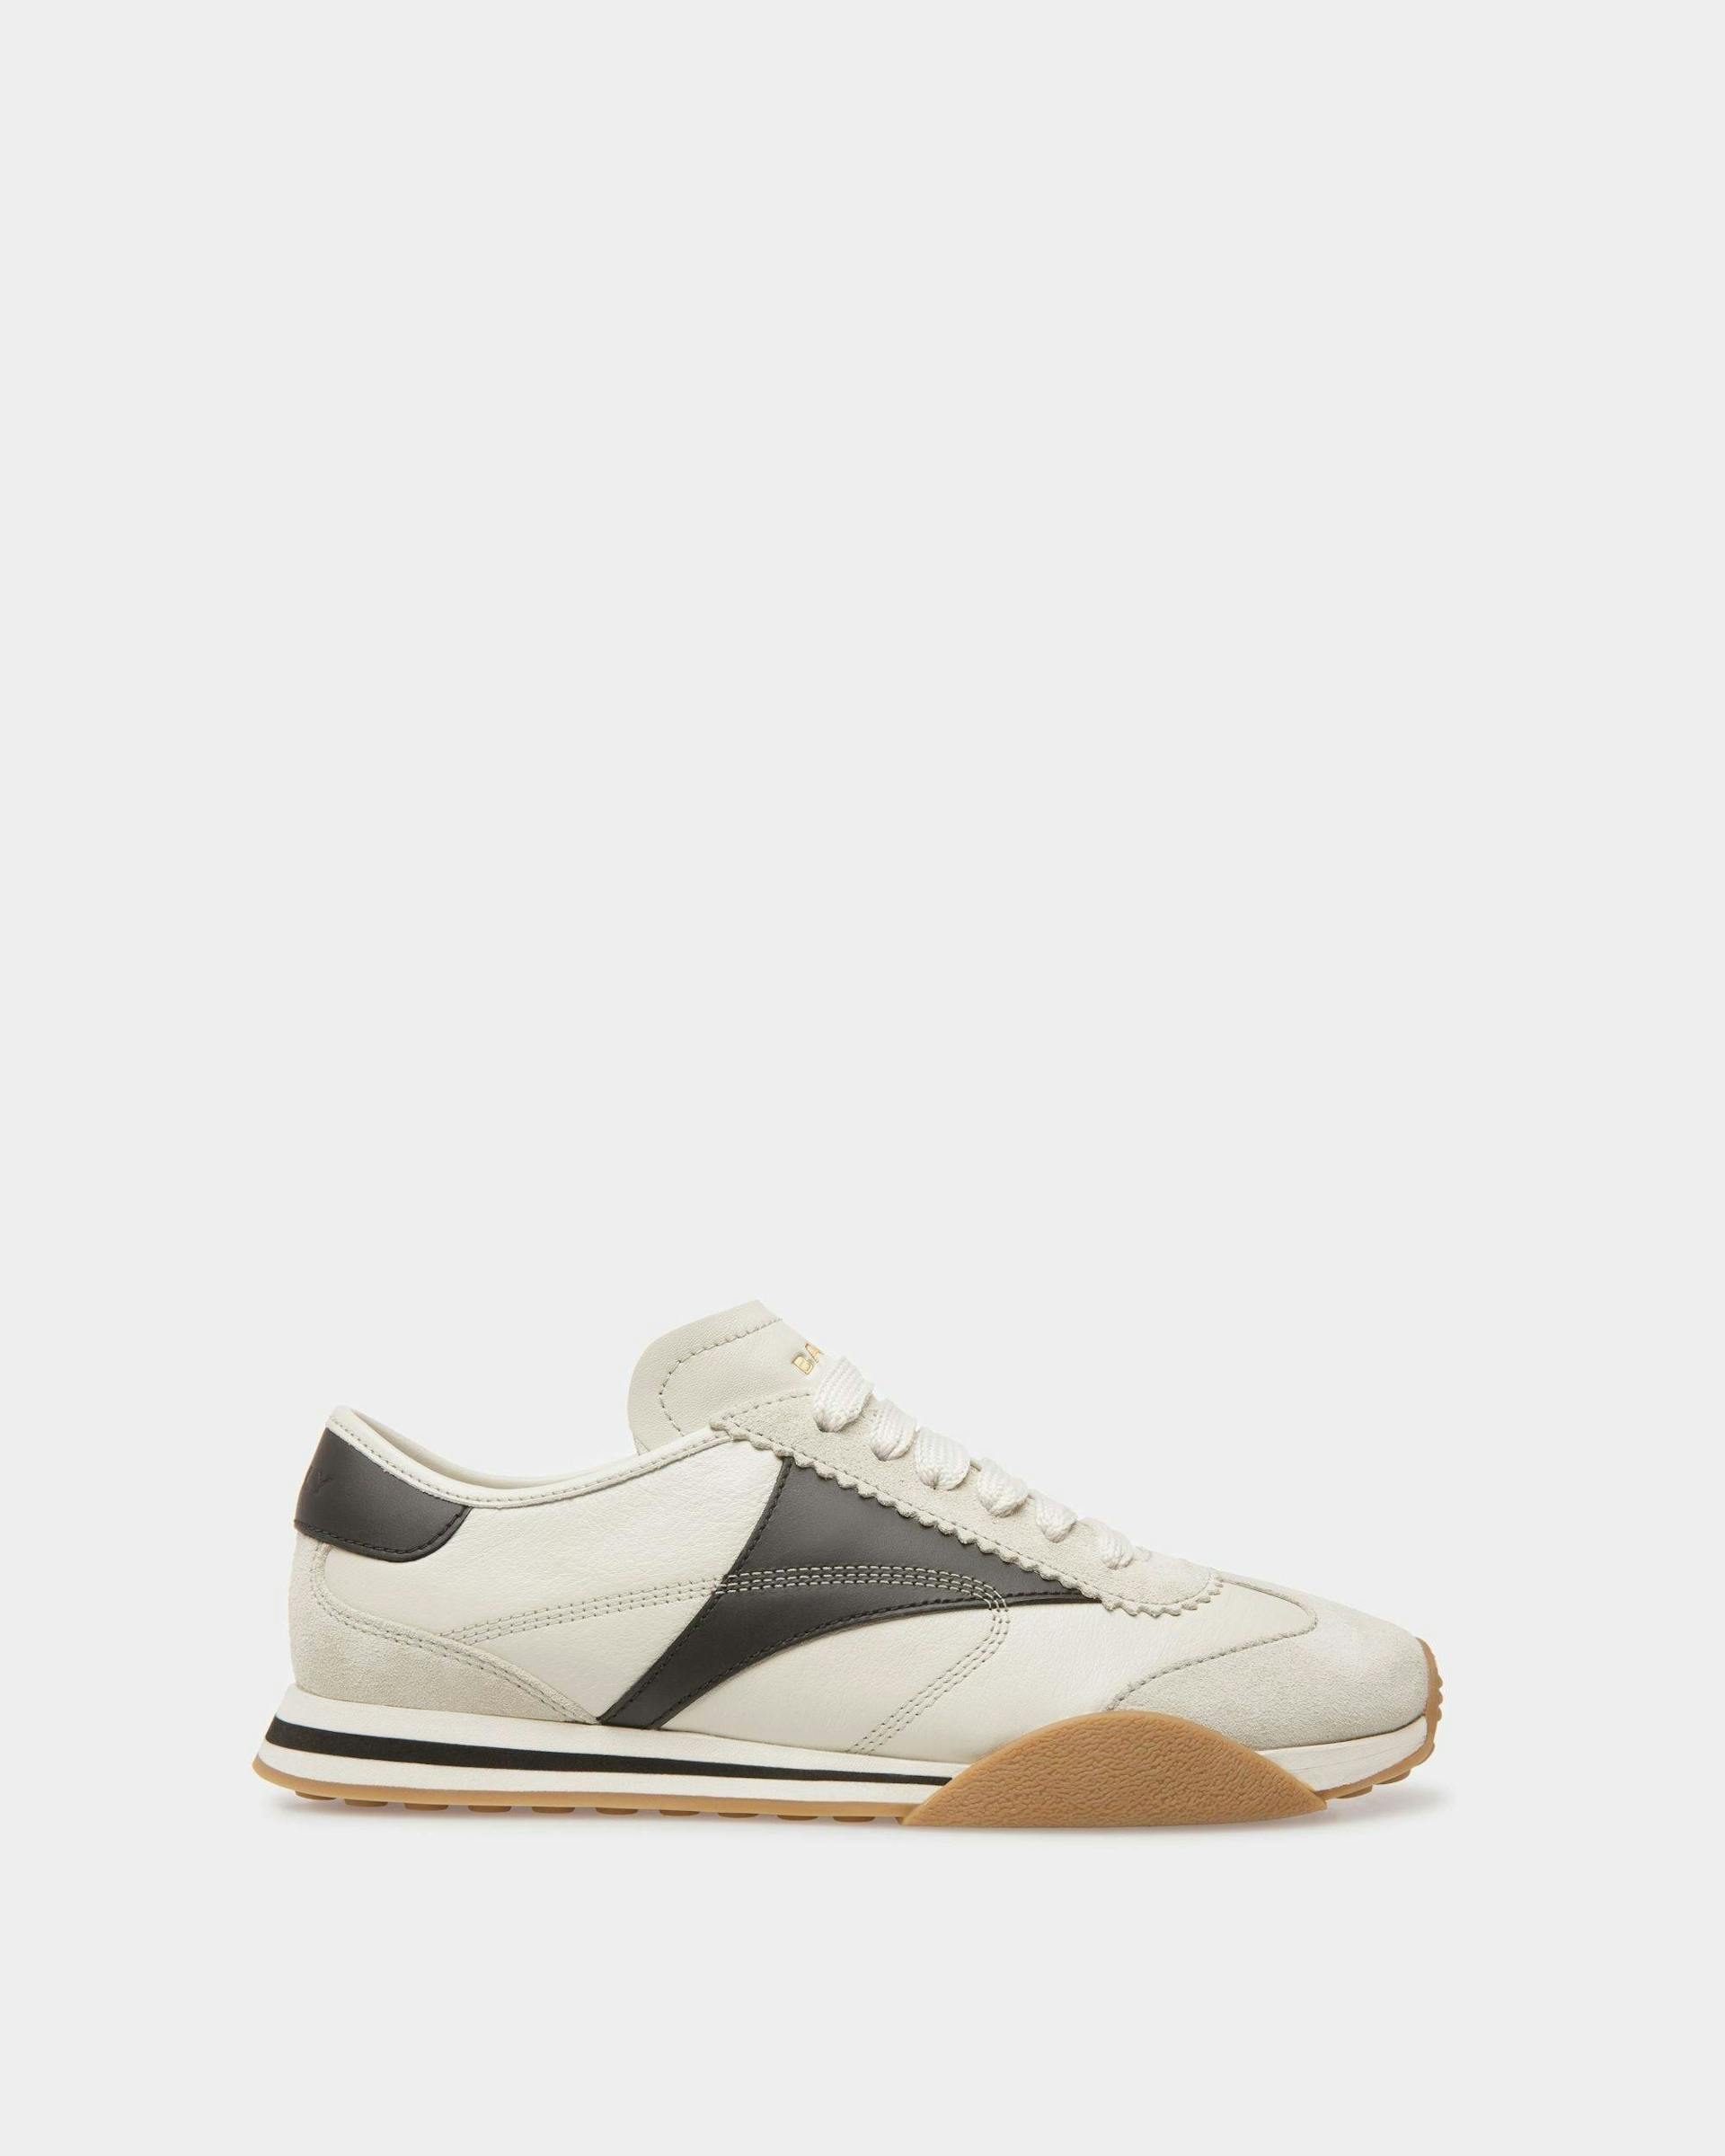 Men's Sussex Sneakers In Black And Dusty White Leather | Bally | Still Life Side